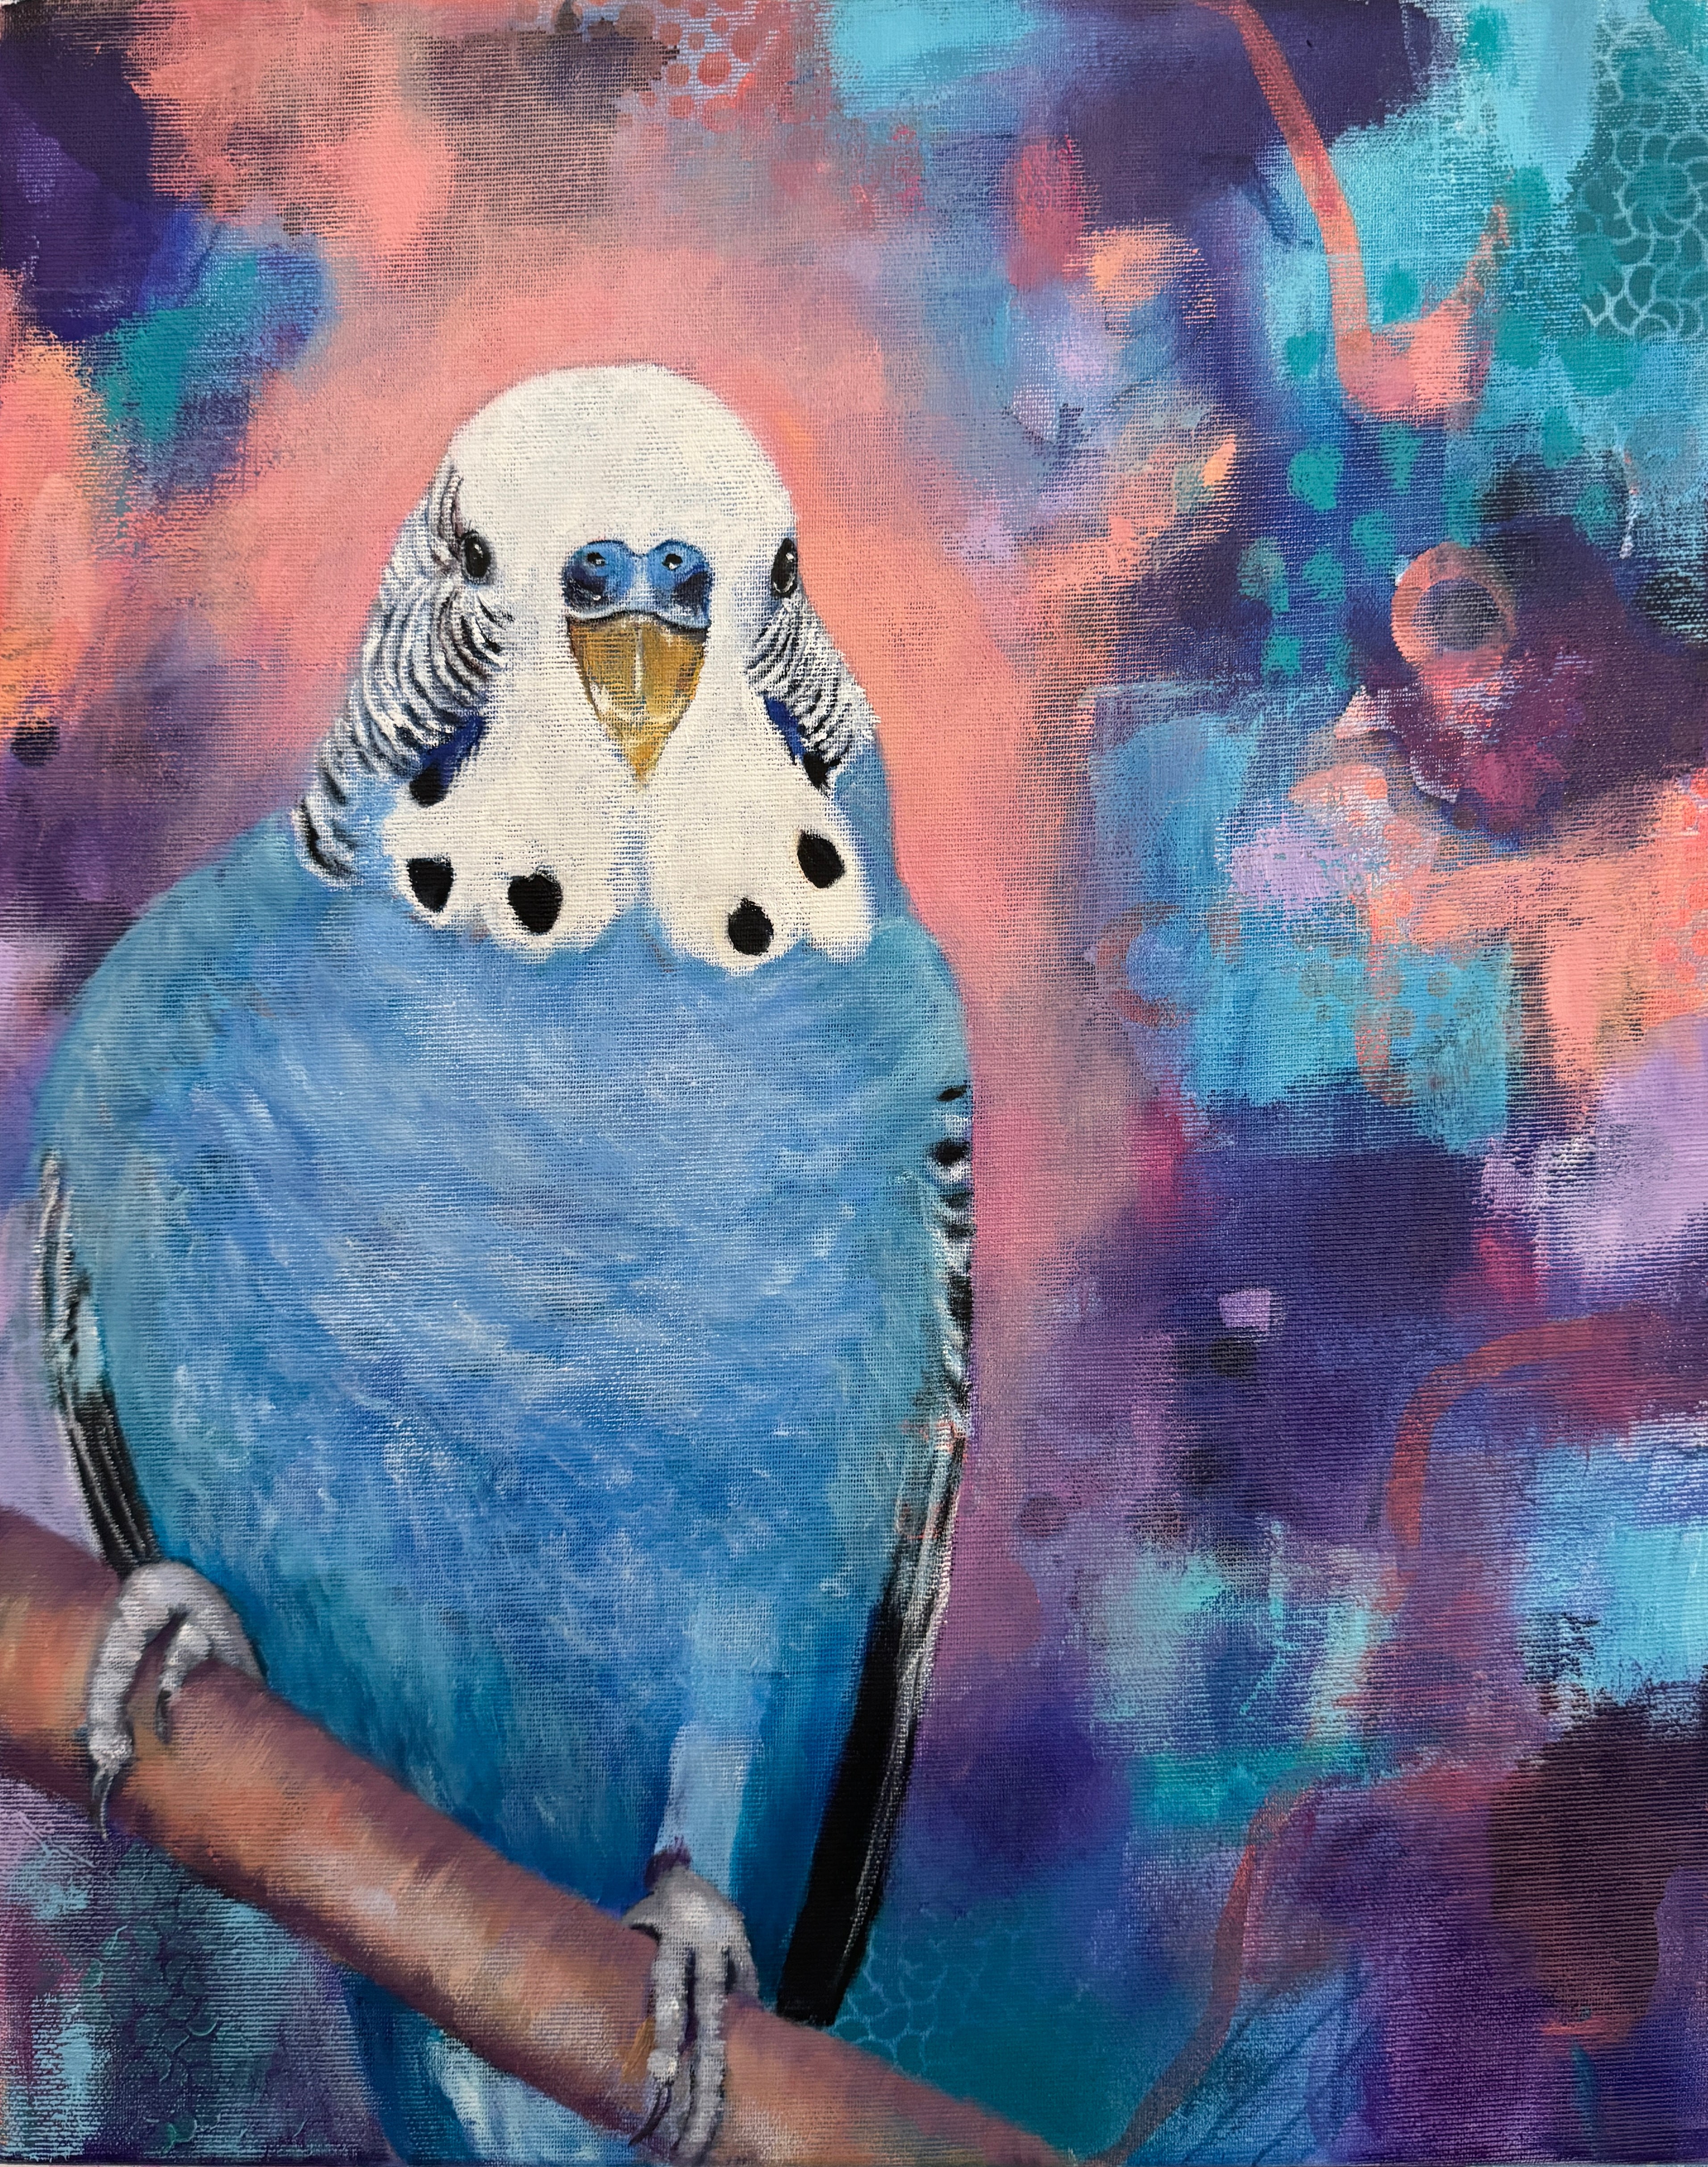 Colourful Mixed media painting of a budgie with abstract background.